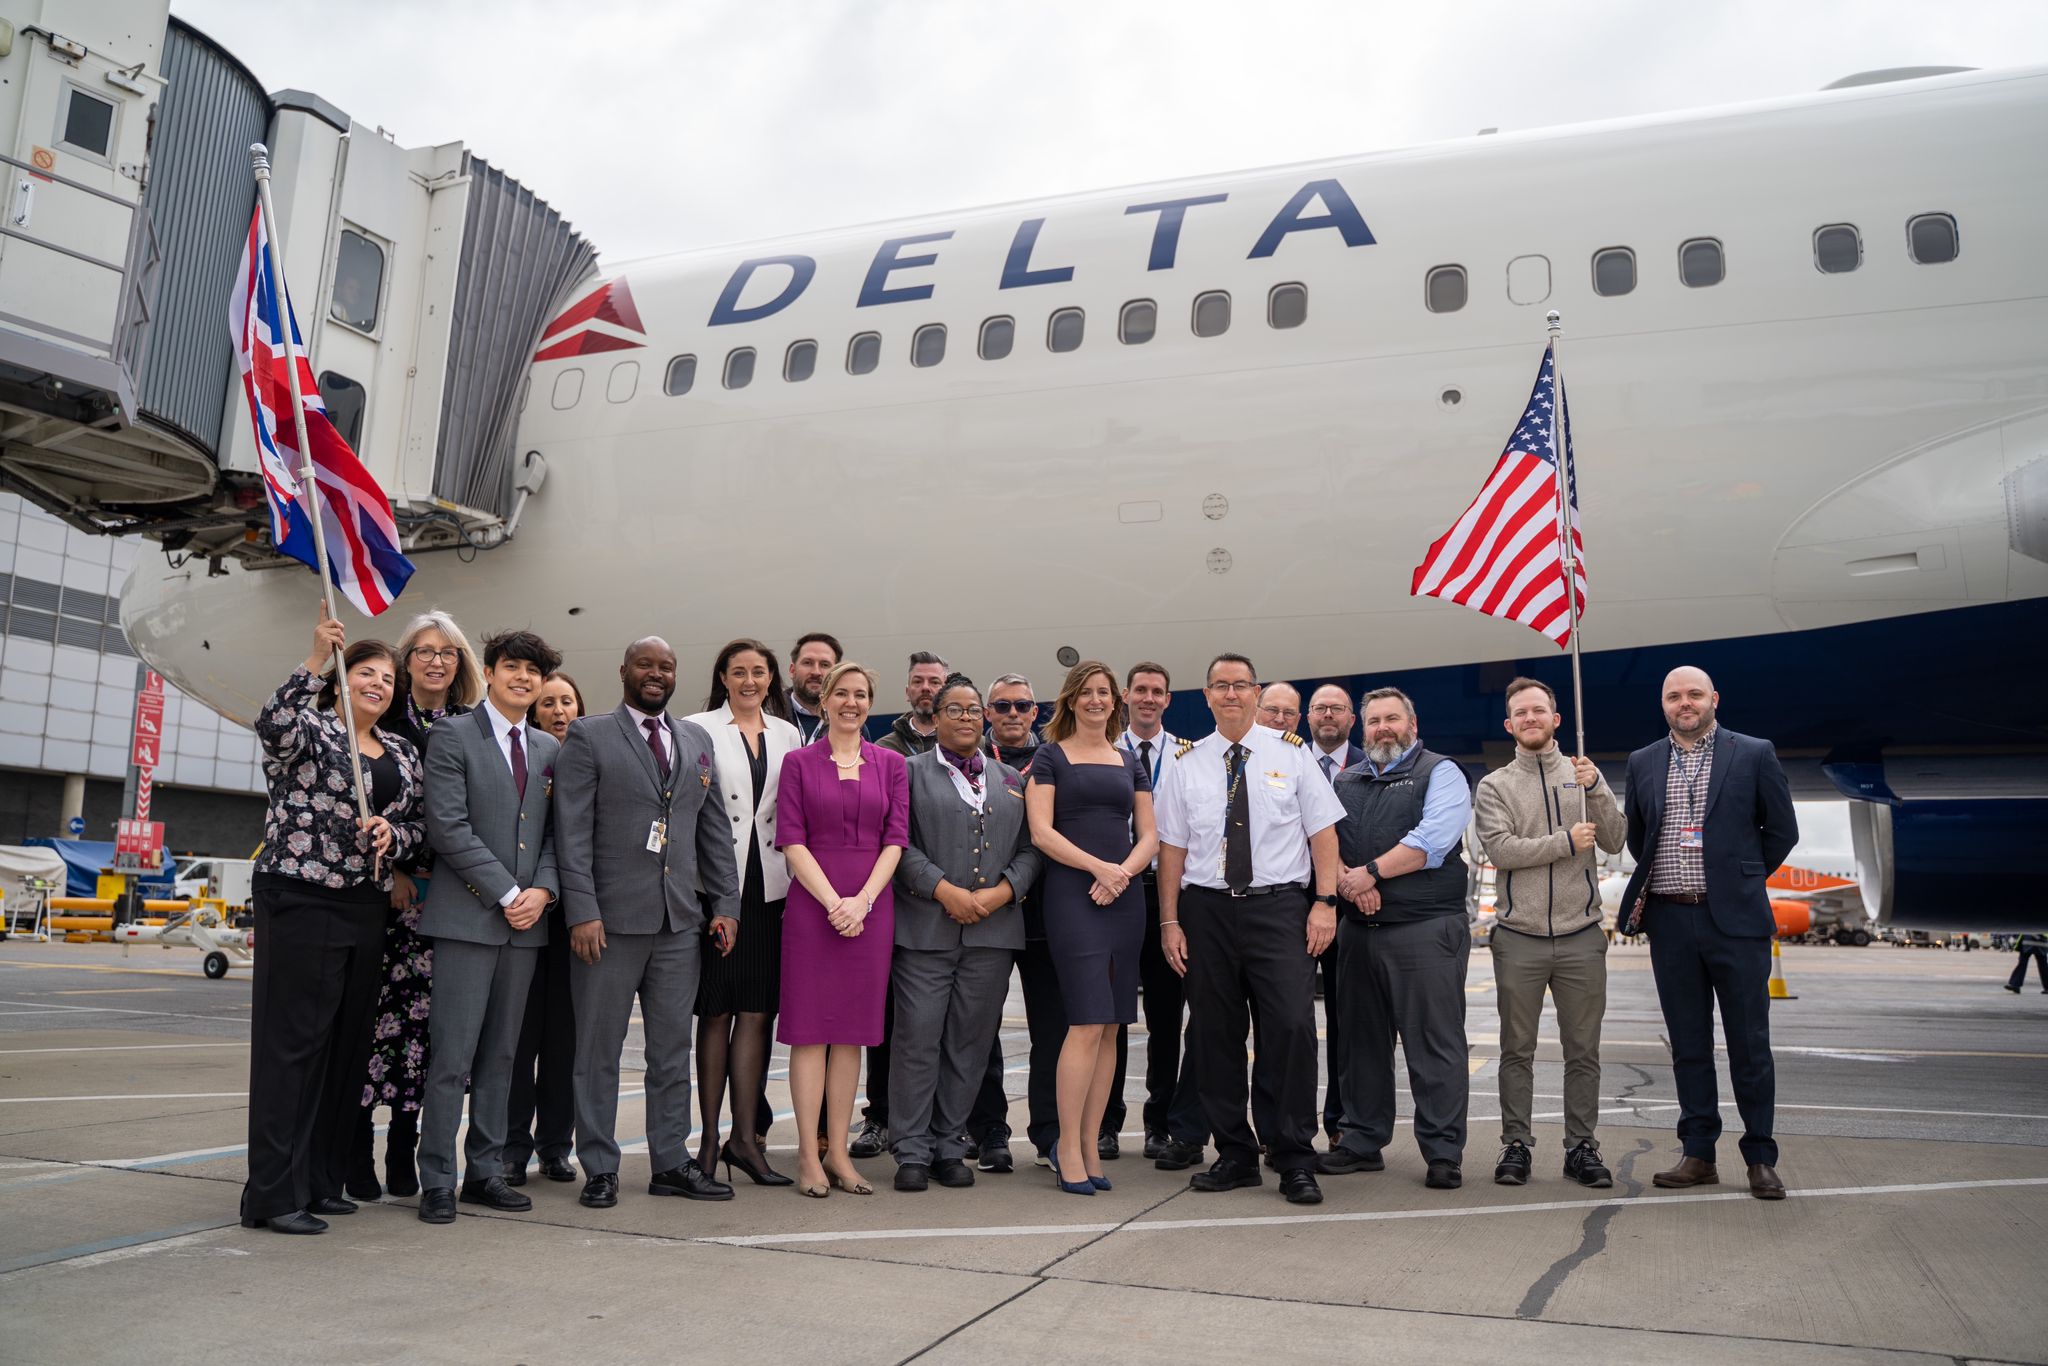 Delta people commemorate their airline's return to London's Gatwick Airport (LGW).